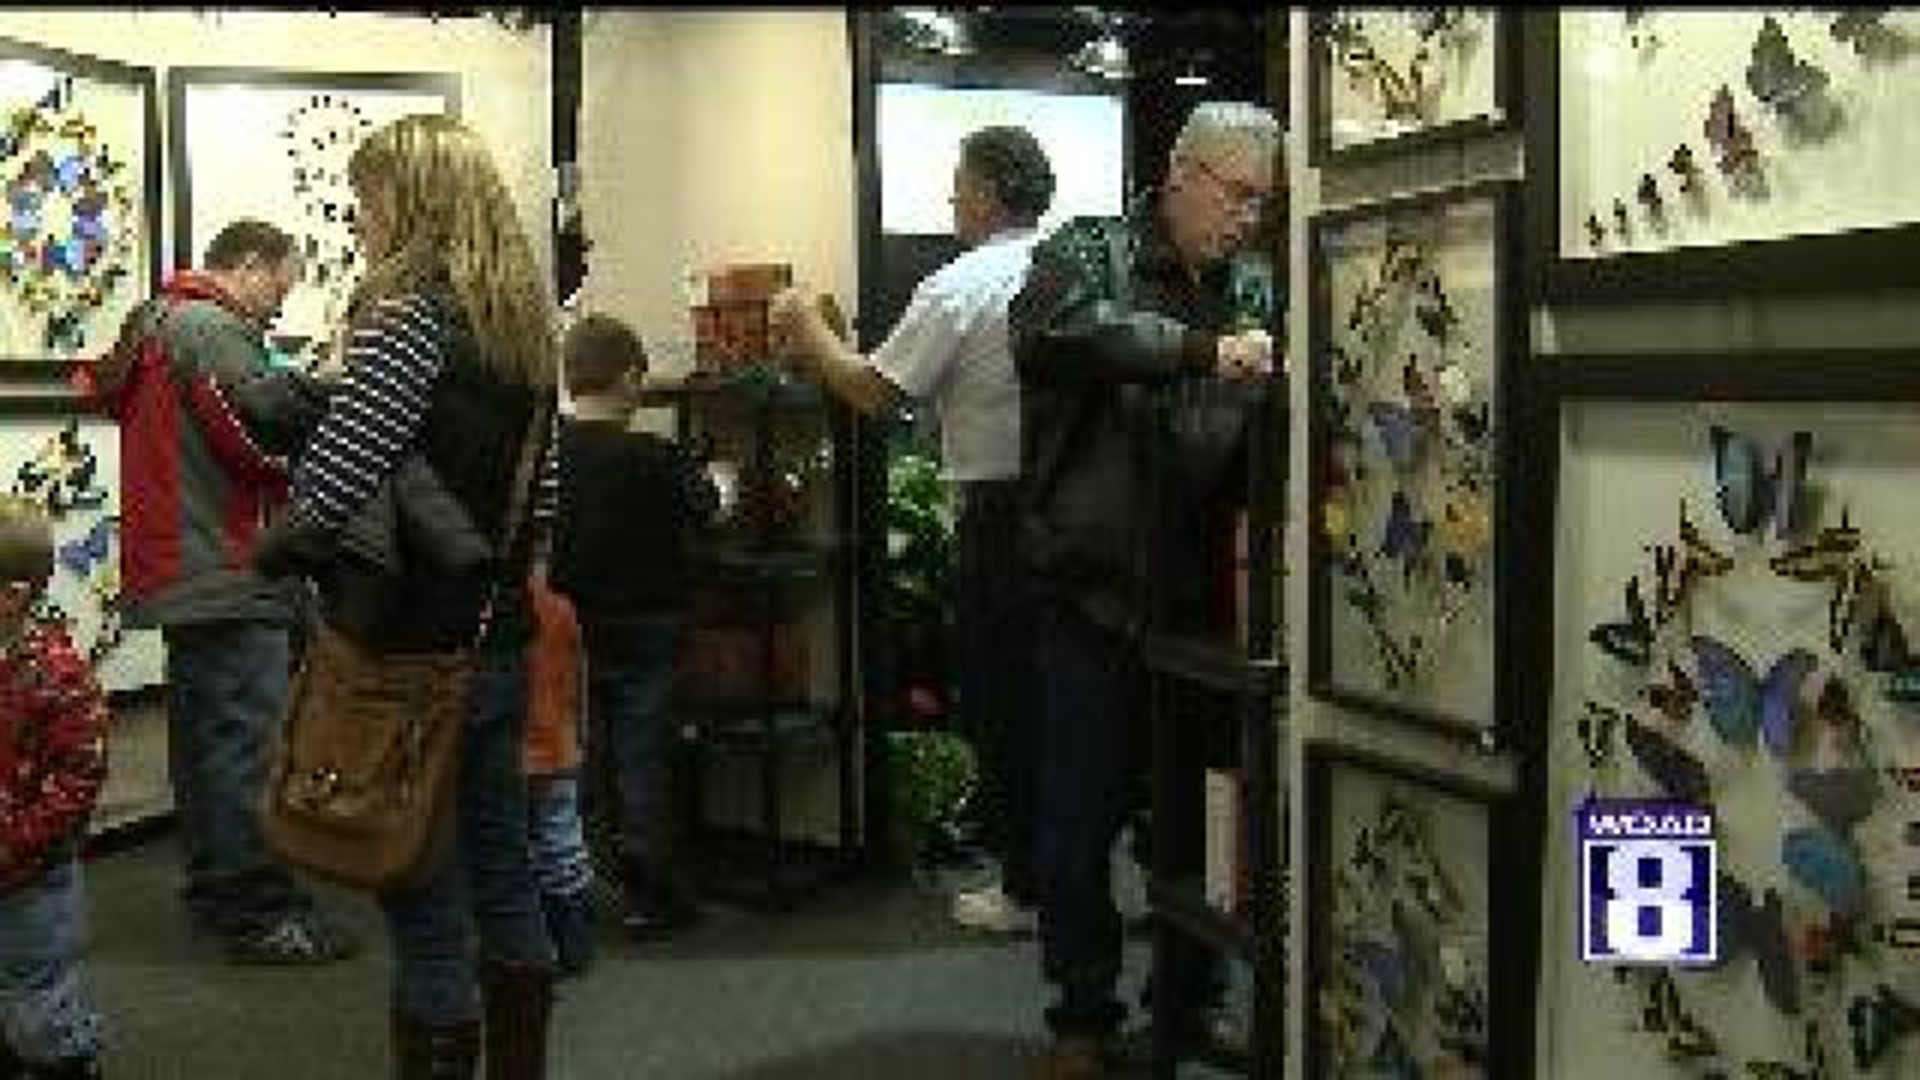 QCCA Expo Center's Flower and Garden Show